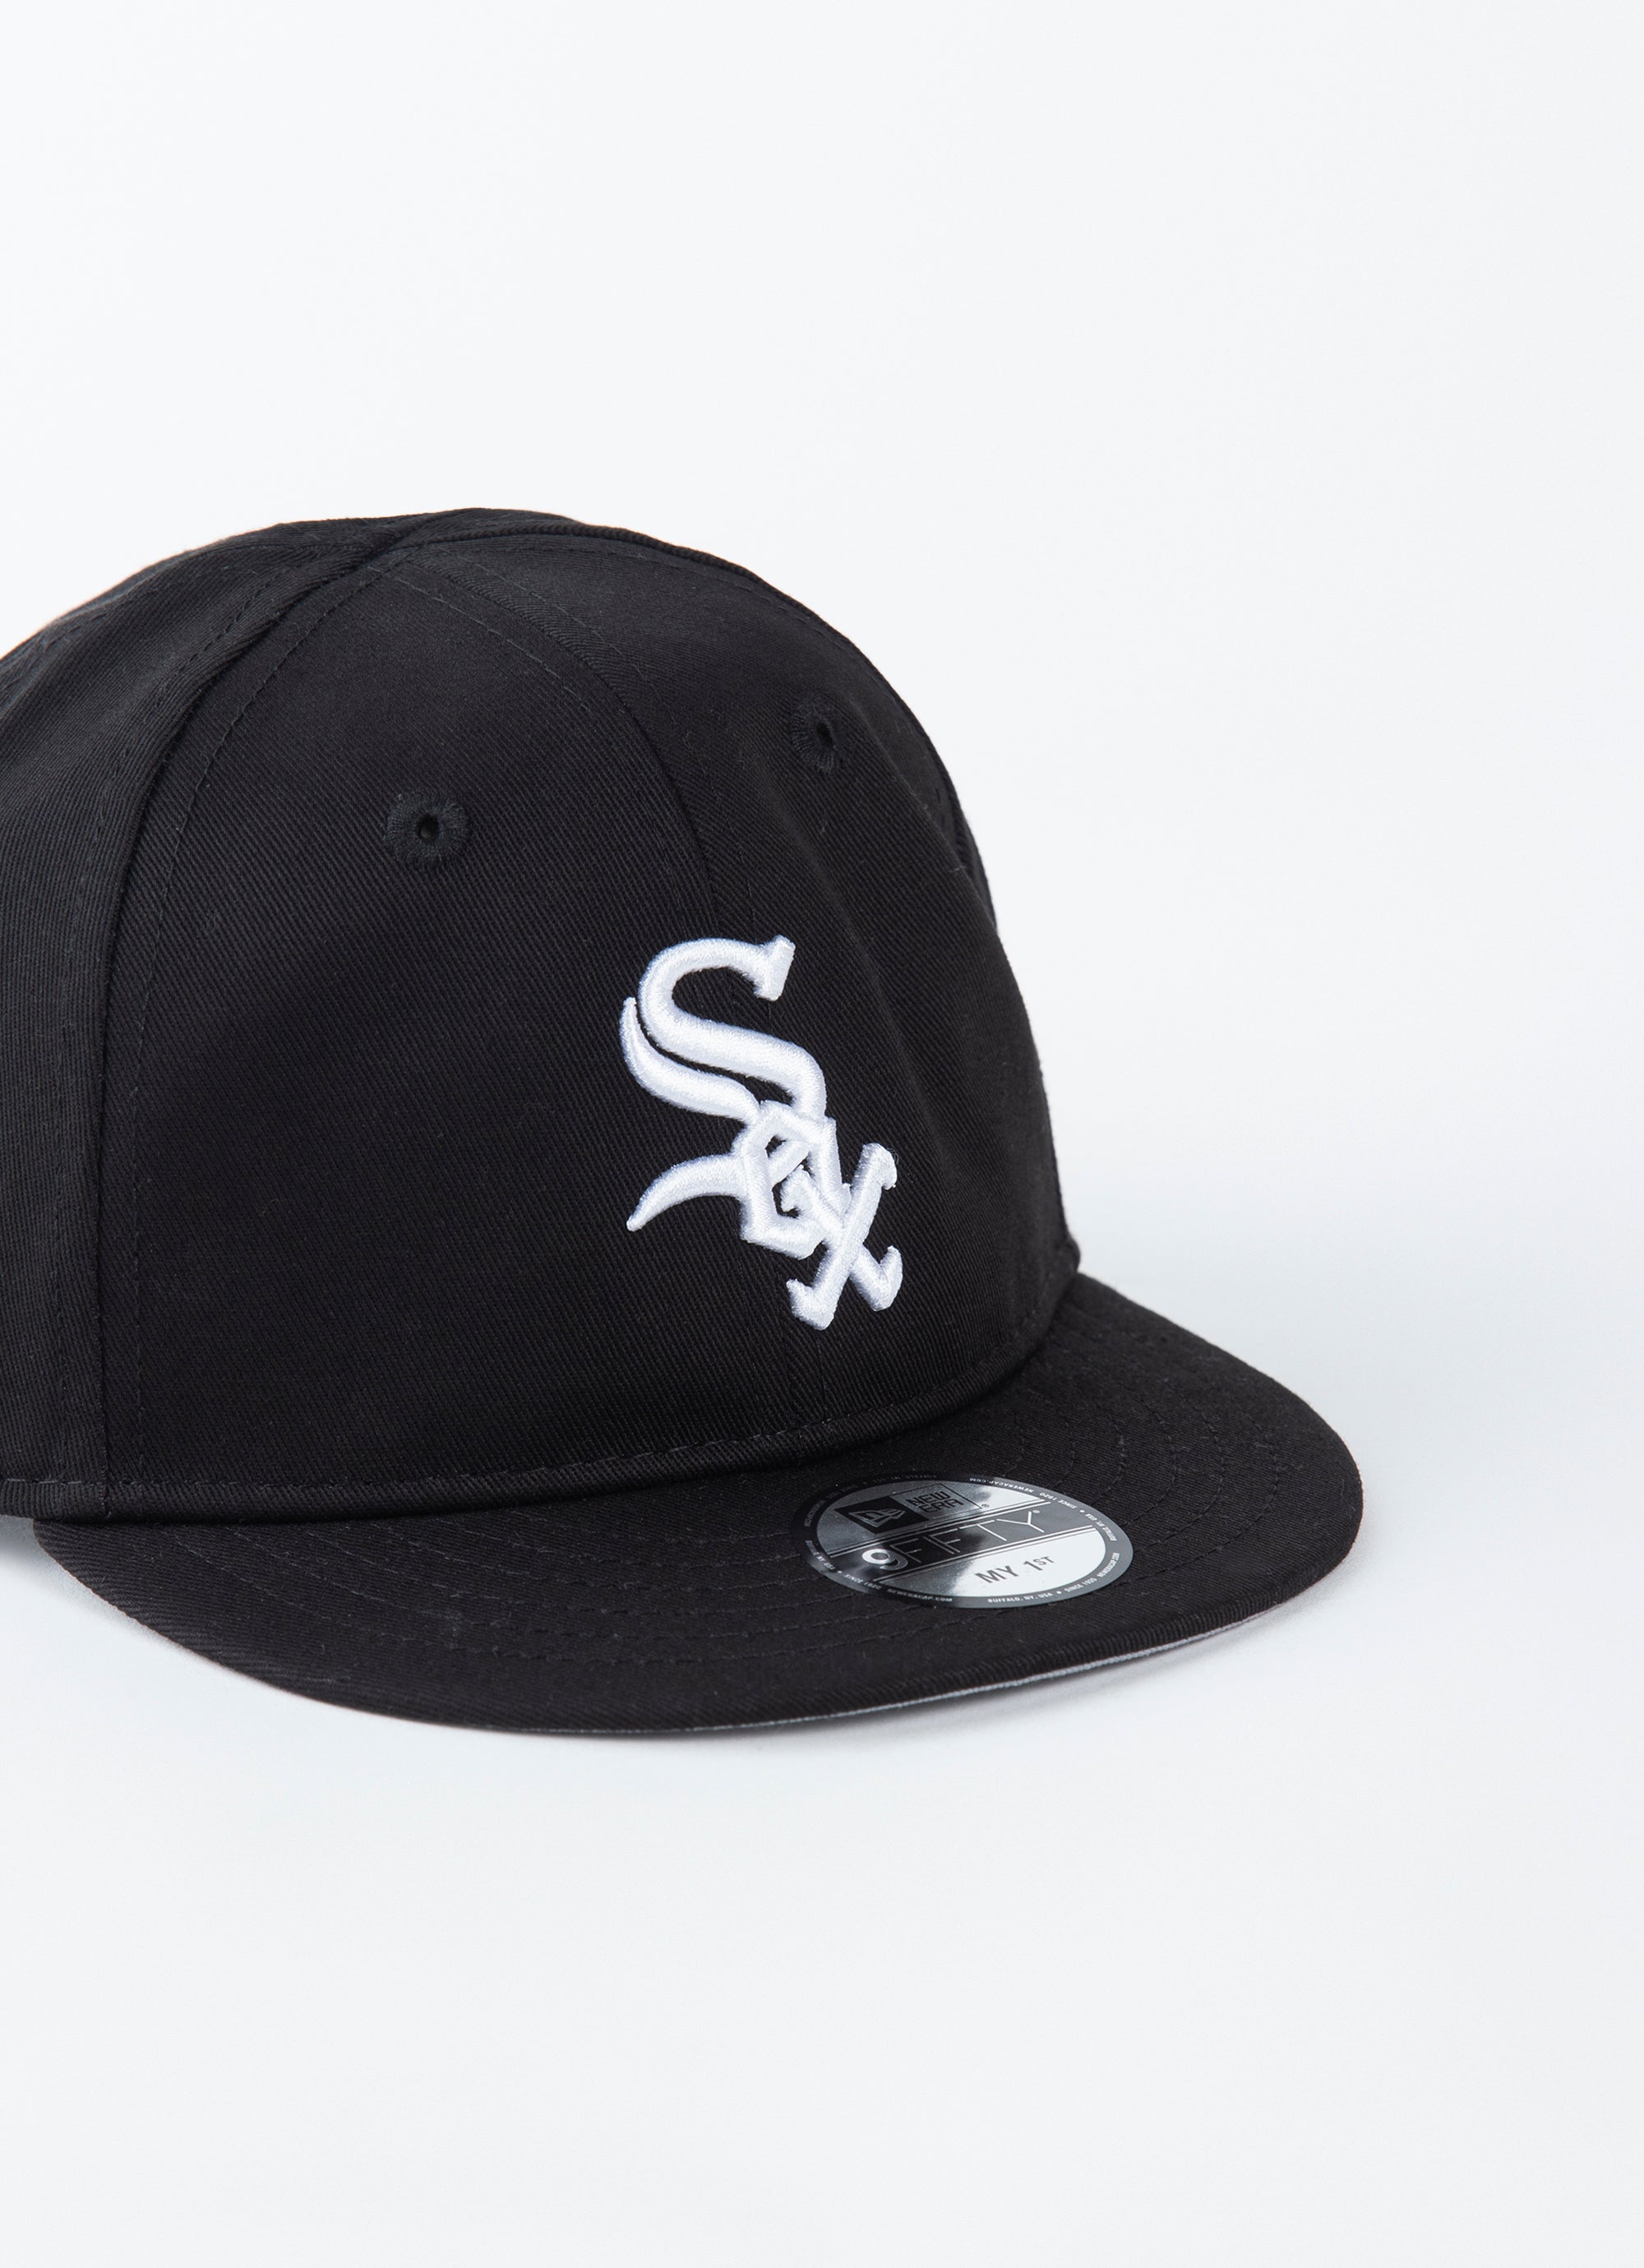 59Fifty MLB Chicago White Sox Cap by New Era  3895 